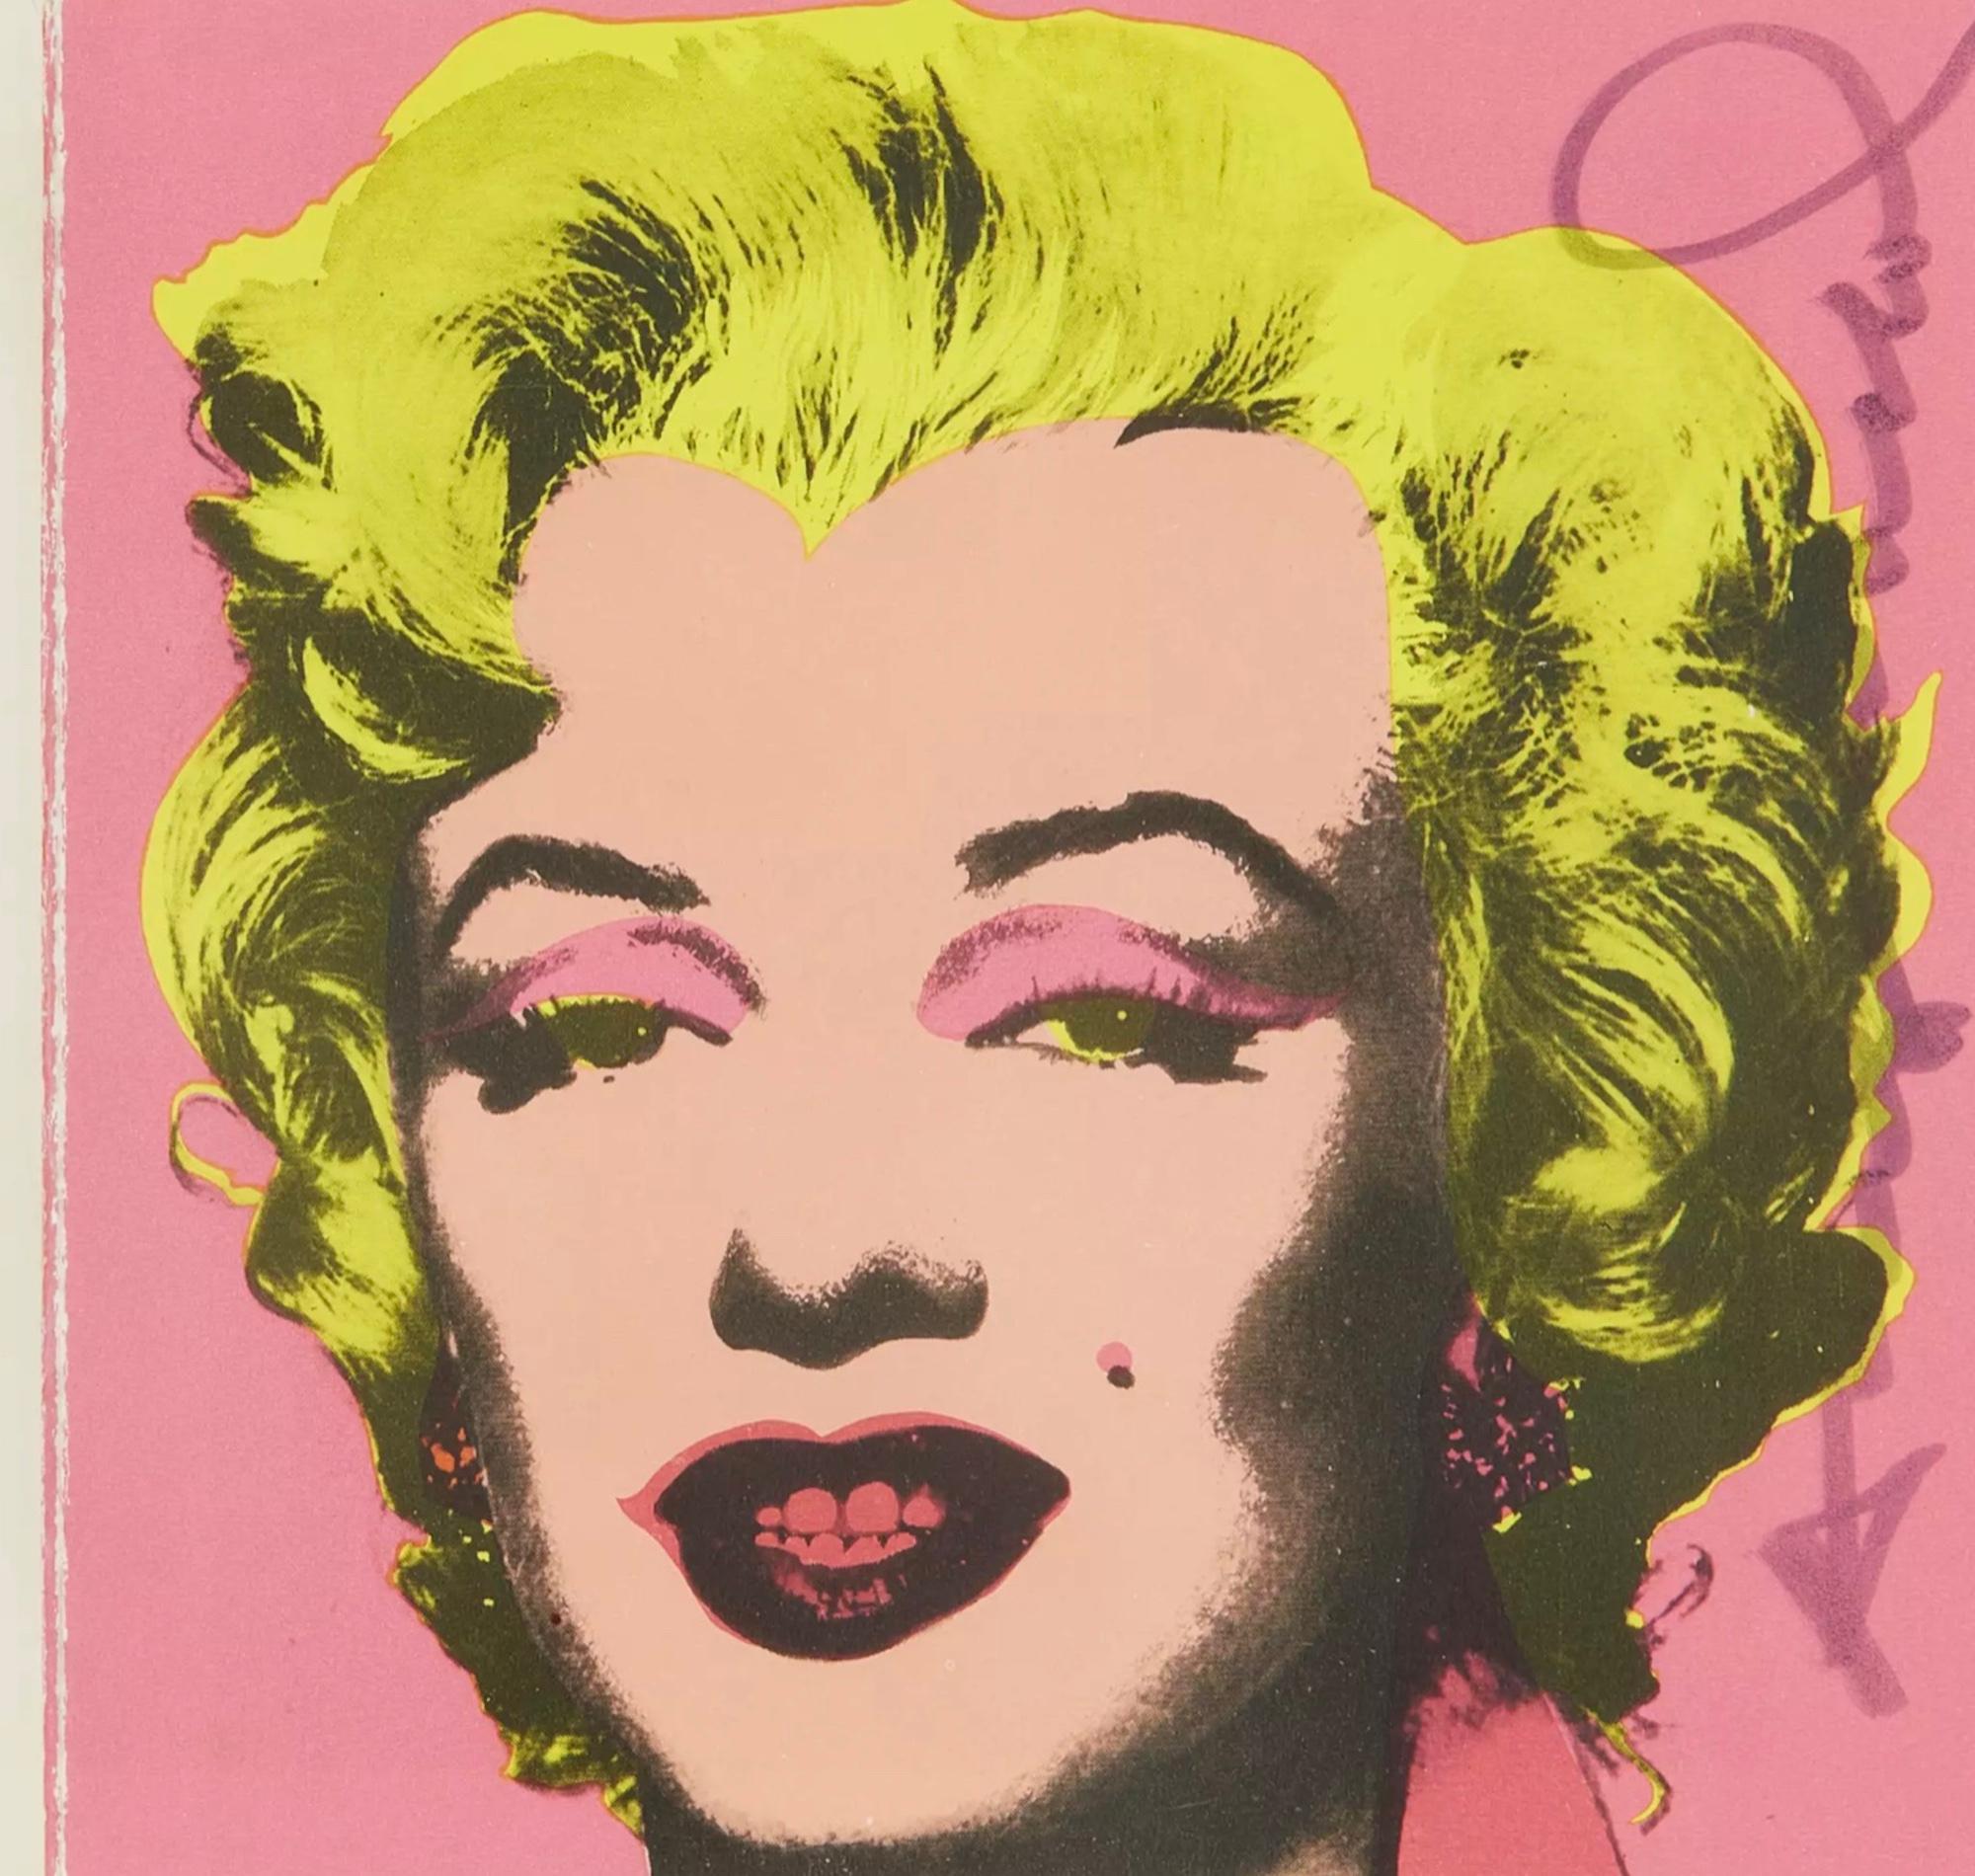 ANDY WARHOL (1928-1987)

Andy Warhol's 'Marilyn (Invitation)' is an offset lithograph in vivid color. The sheet is signed and inscribed '101' on the verso. This piece is in excellent condition and framed beautifully. Printed by Color Editions Inc.,